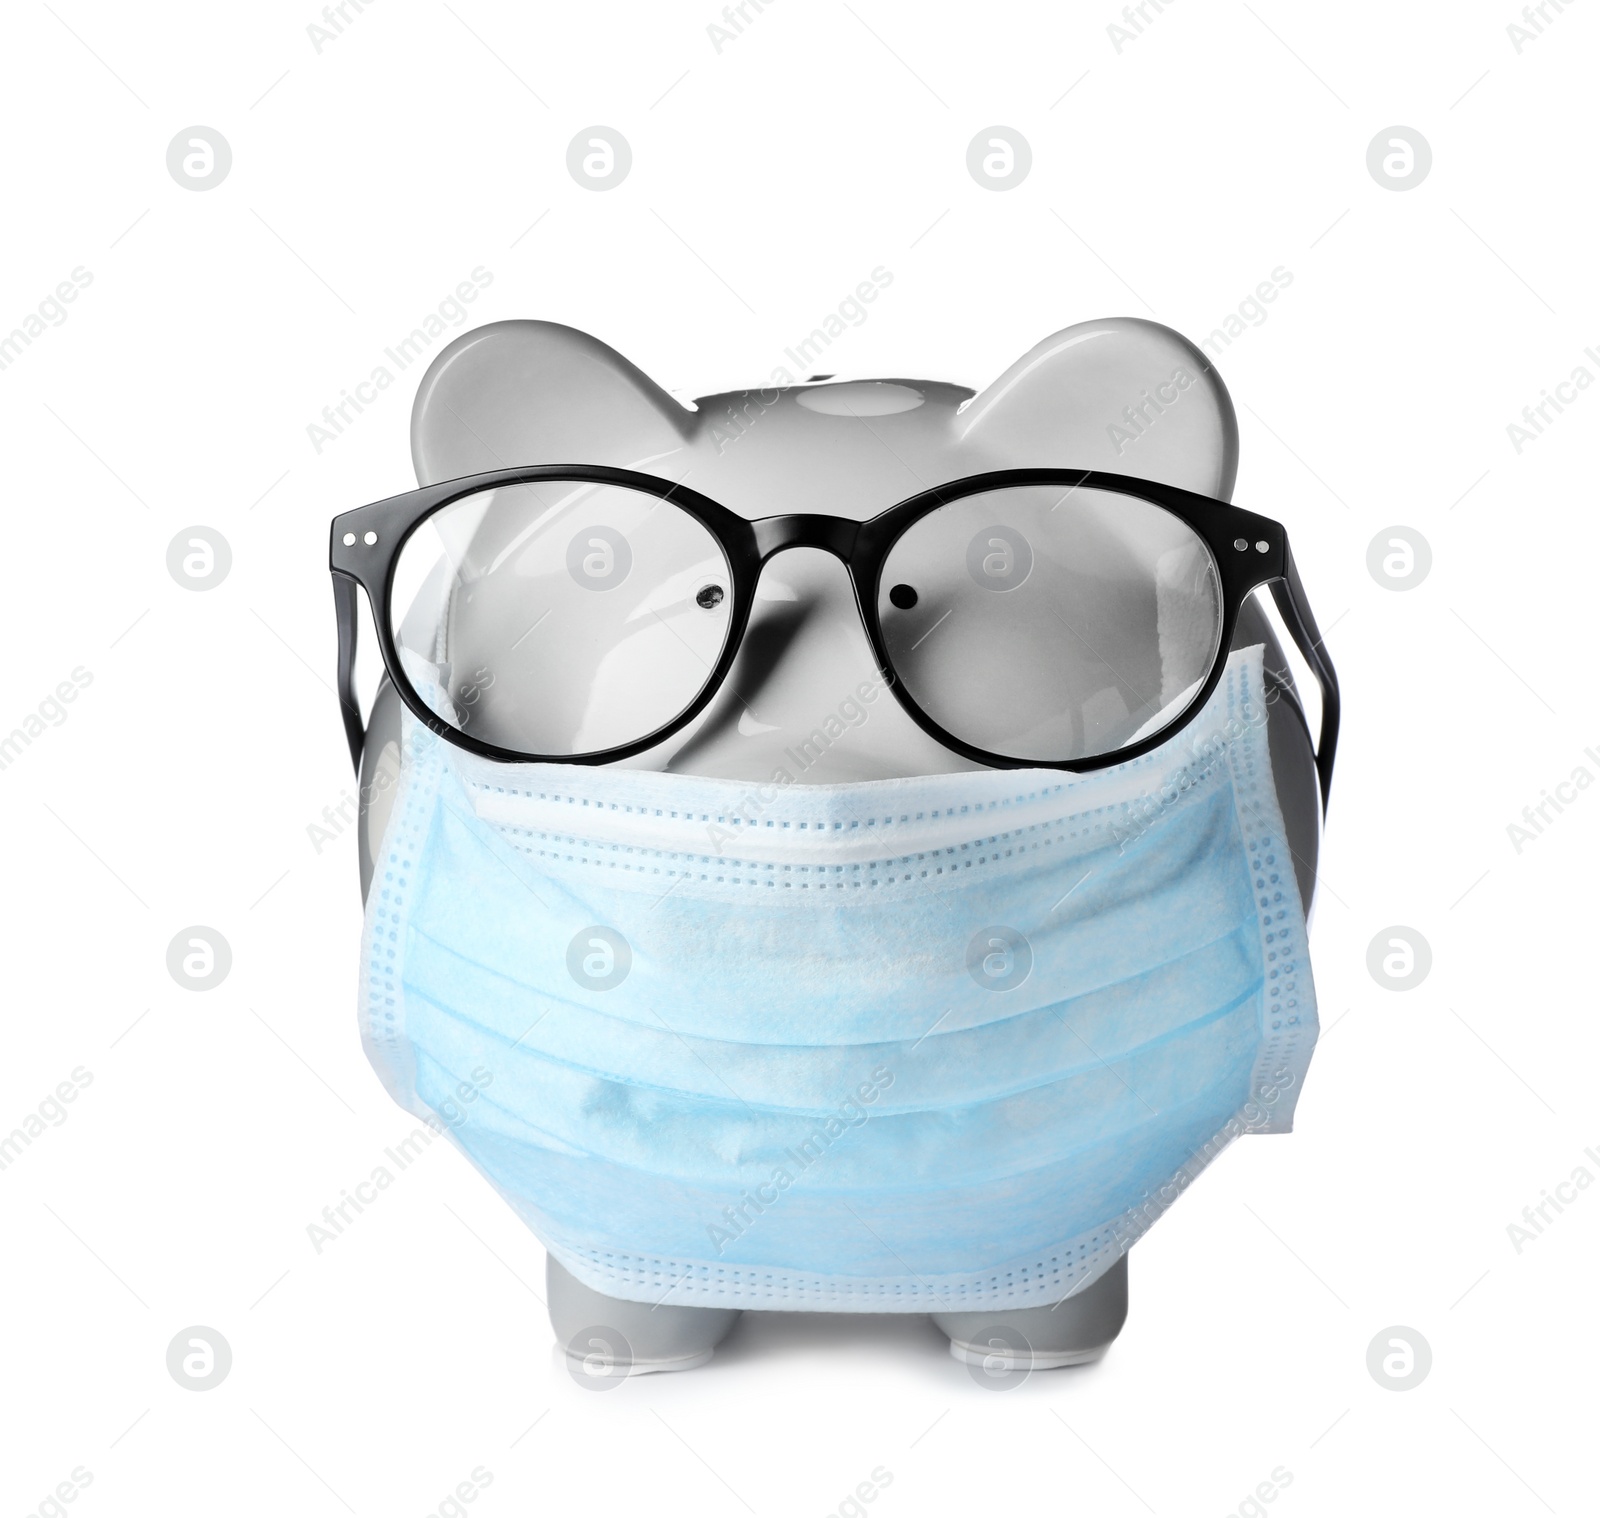 Photo of Piggy bank with glasses and face mask isolated on white